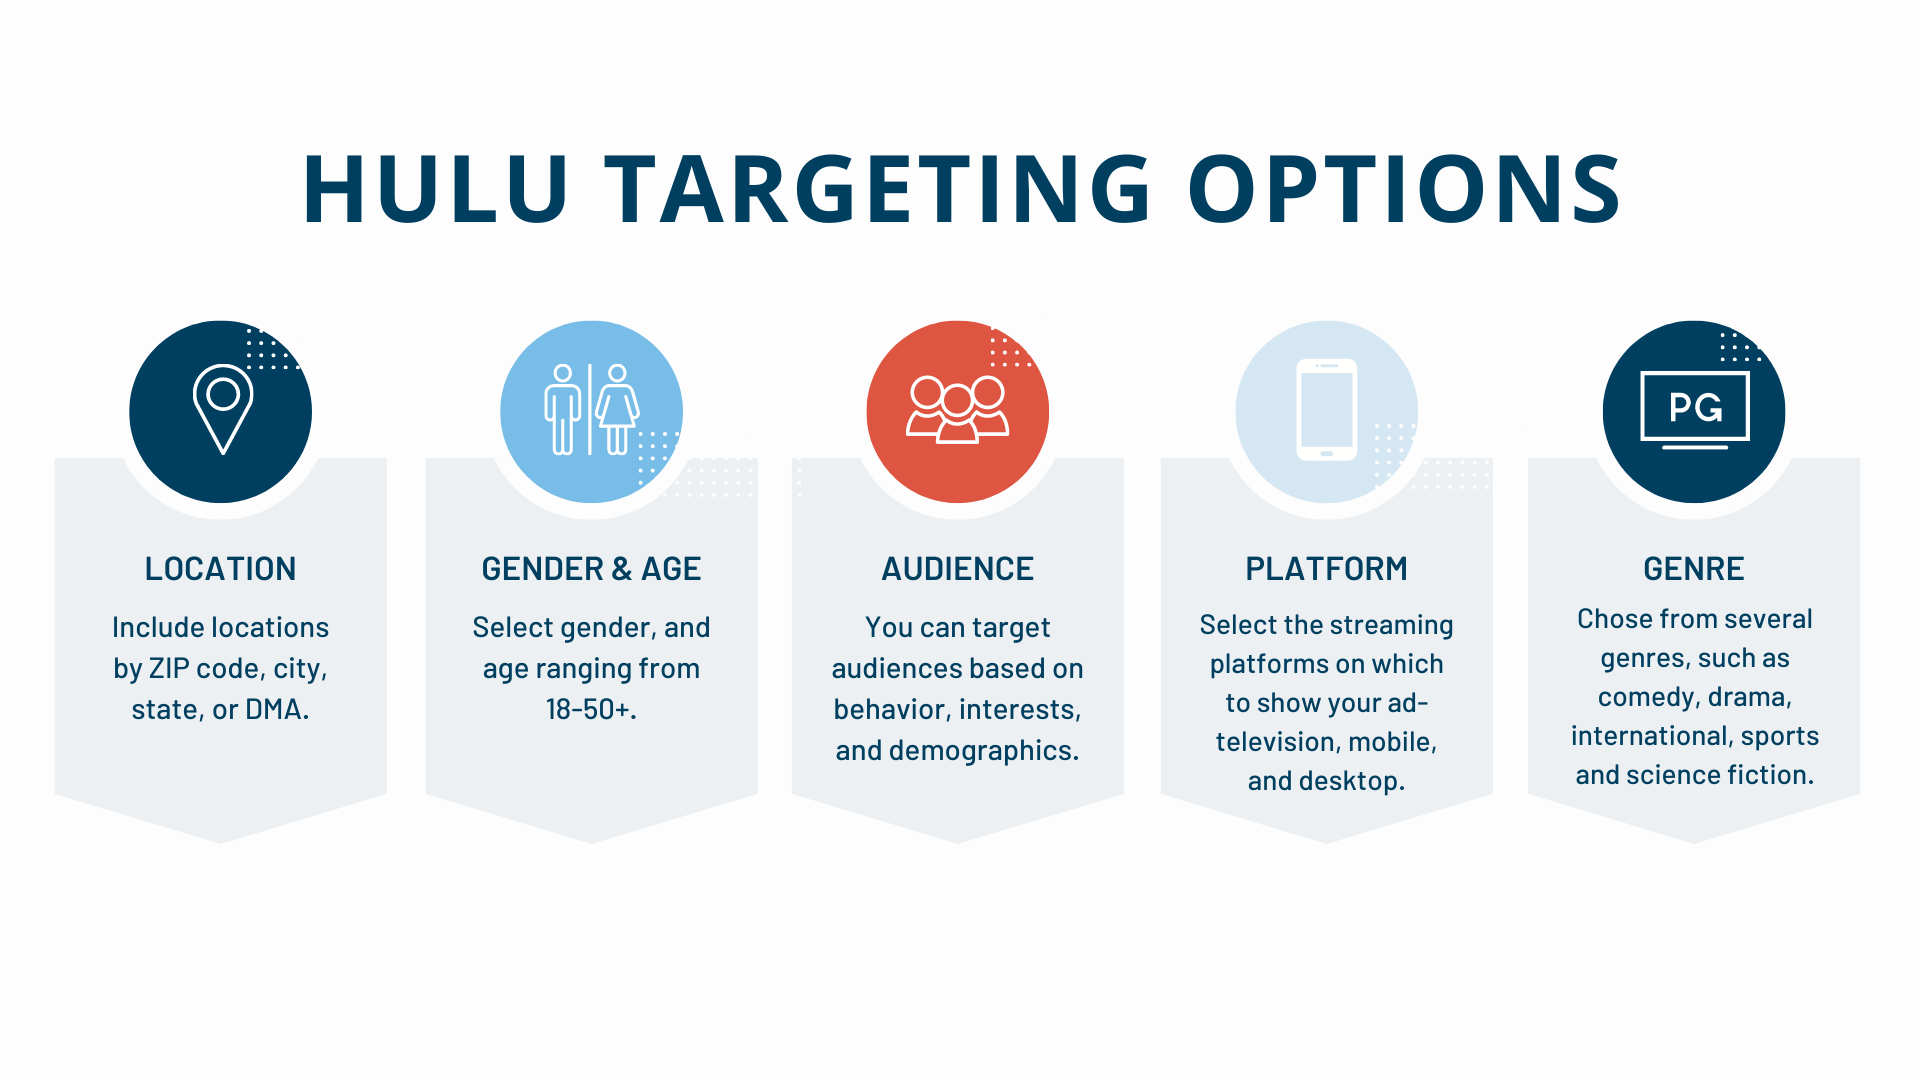 graphic showing hulu targeting options: location, gender and age, audience, platform and genre